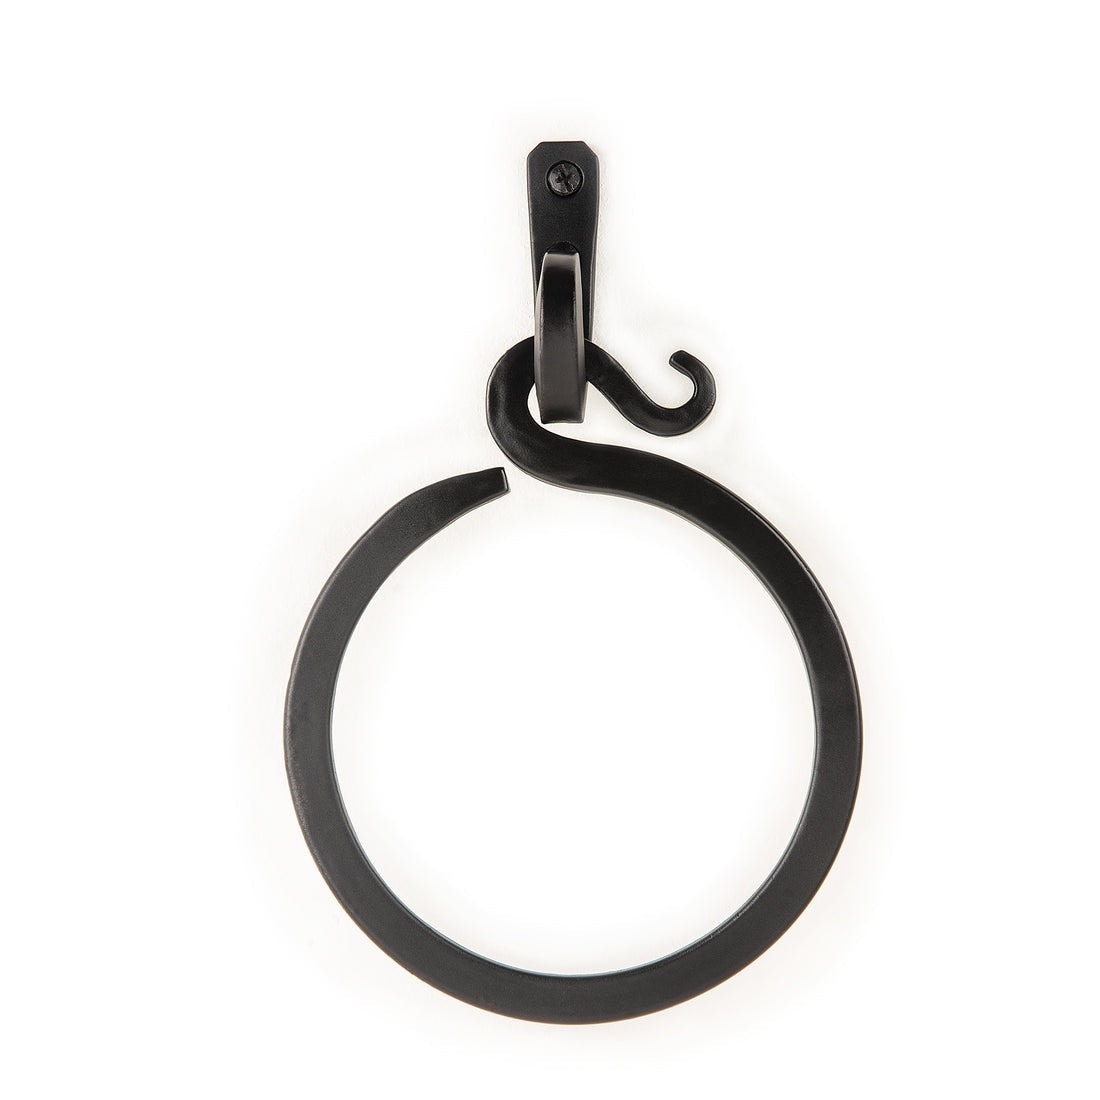 Allied Brass Mercury Collection Towel Ring with Twist Accent - On Sale -  Bed Bath & Beyond - 10417224